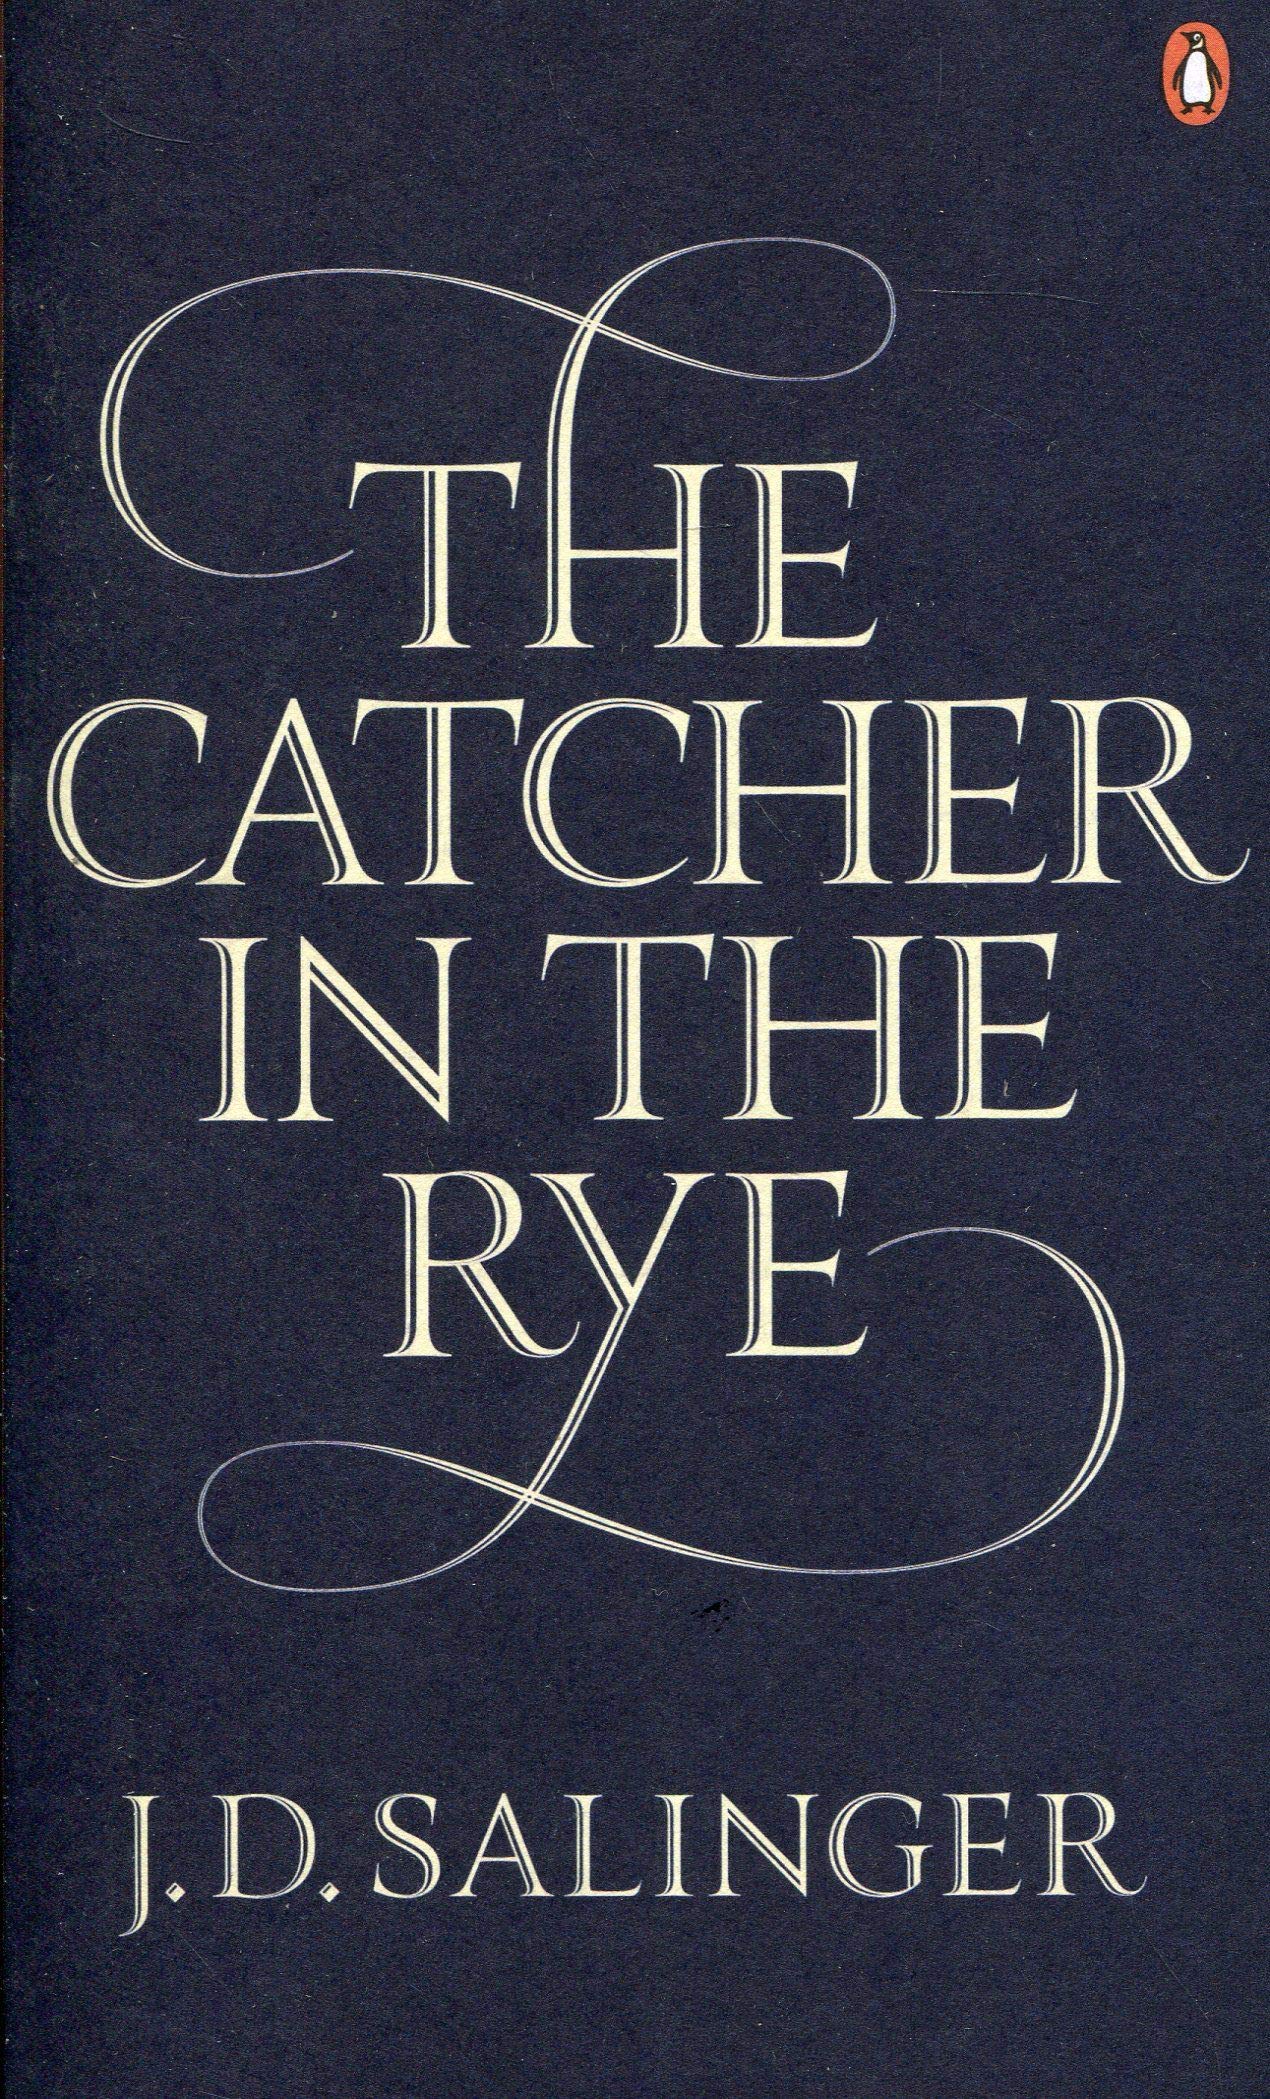 book review catcher in the rye